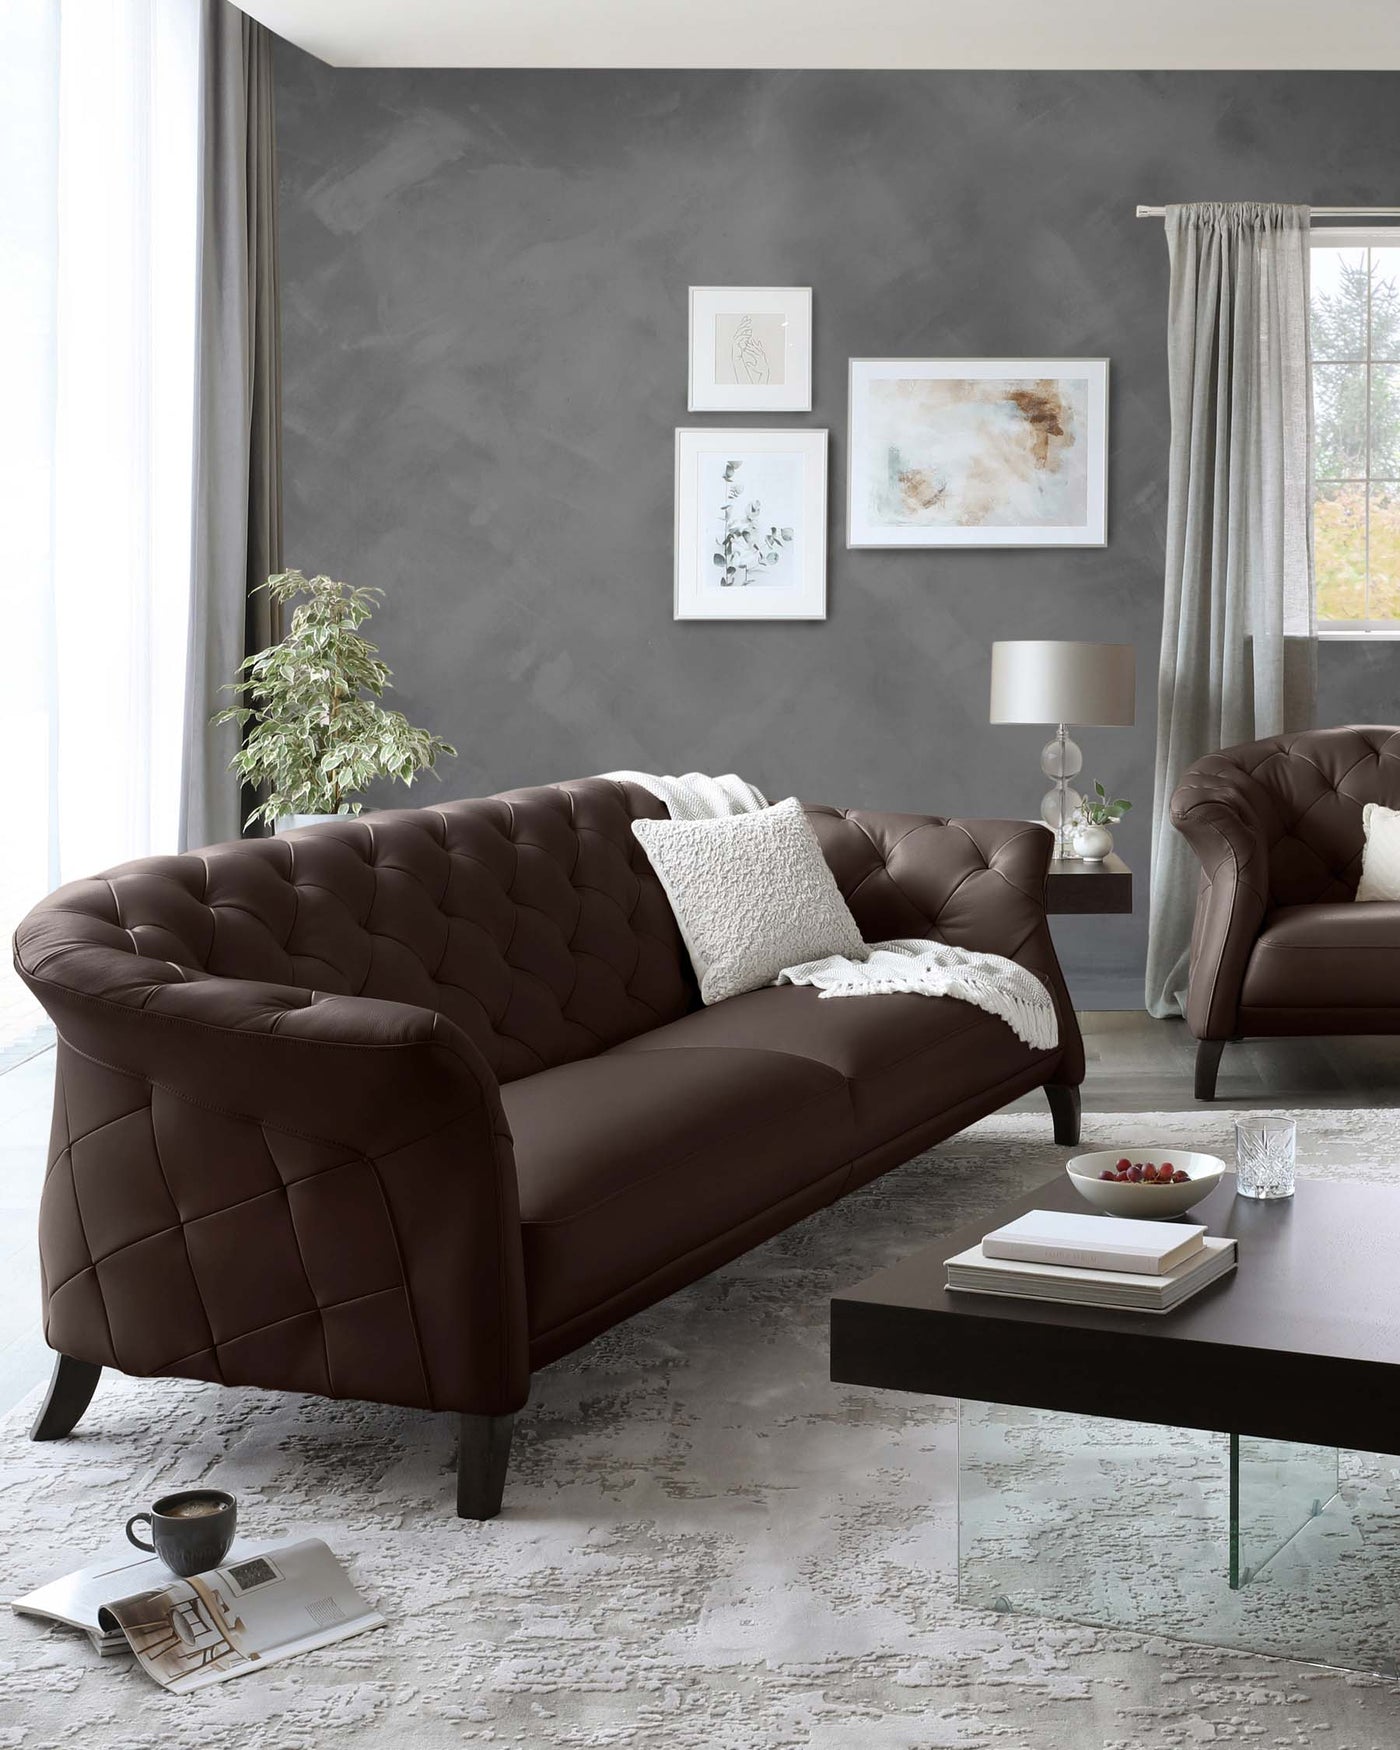 Elegant brown tufted leather sofa with matching armchair, complemented by a glass-top coffee table with dark wooden base, set against a distressed white rug.